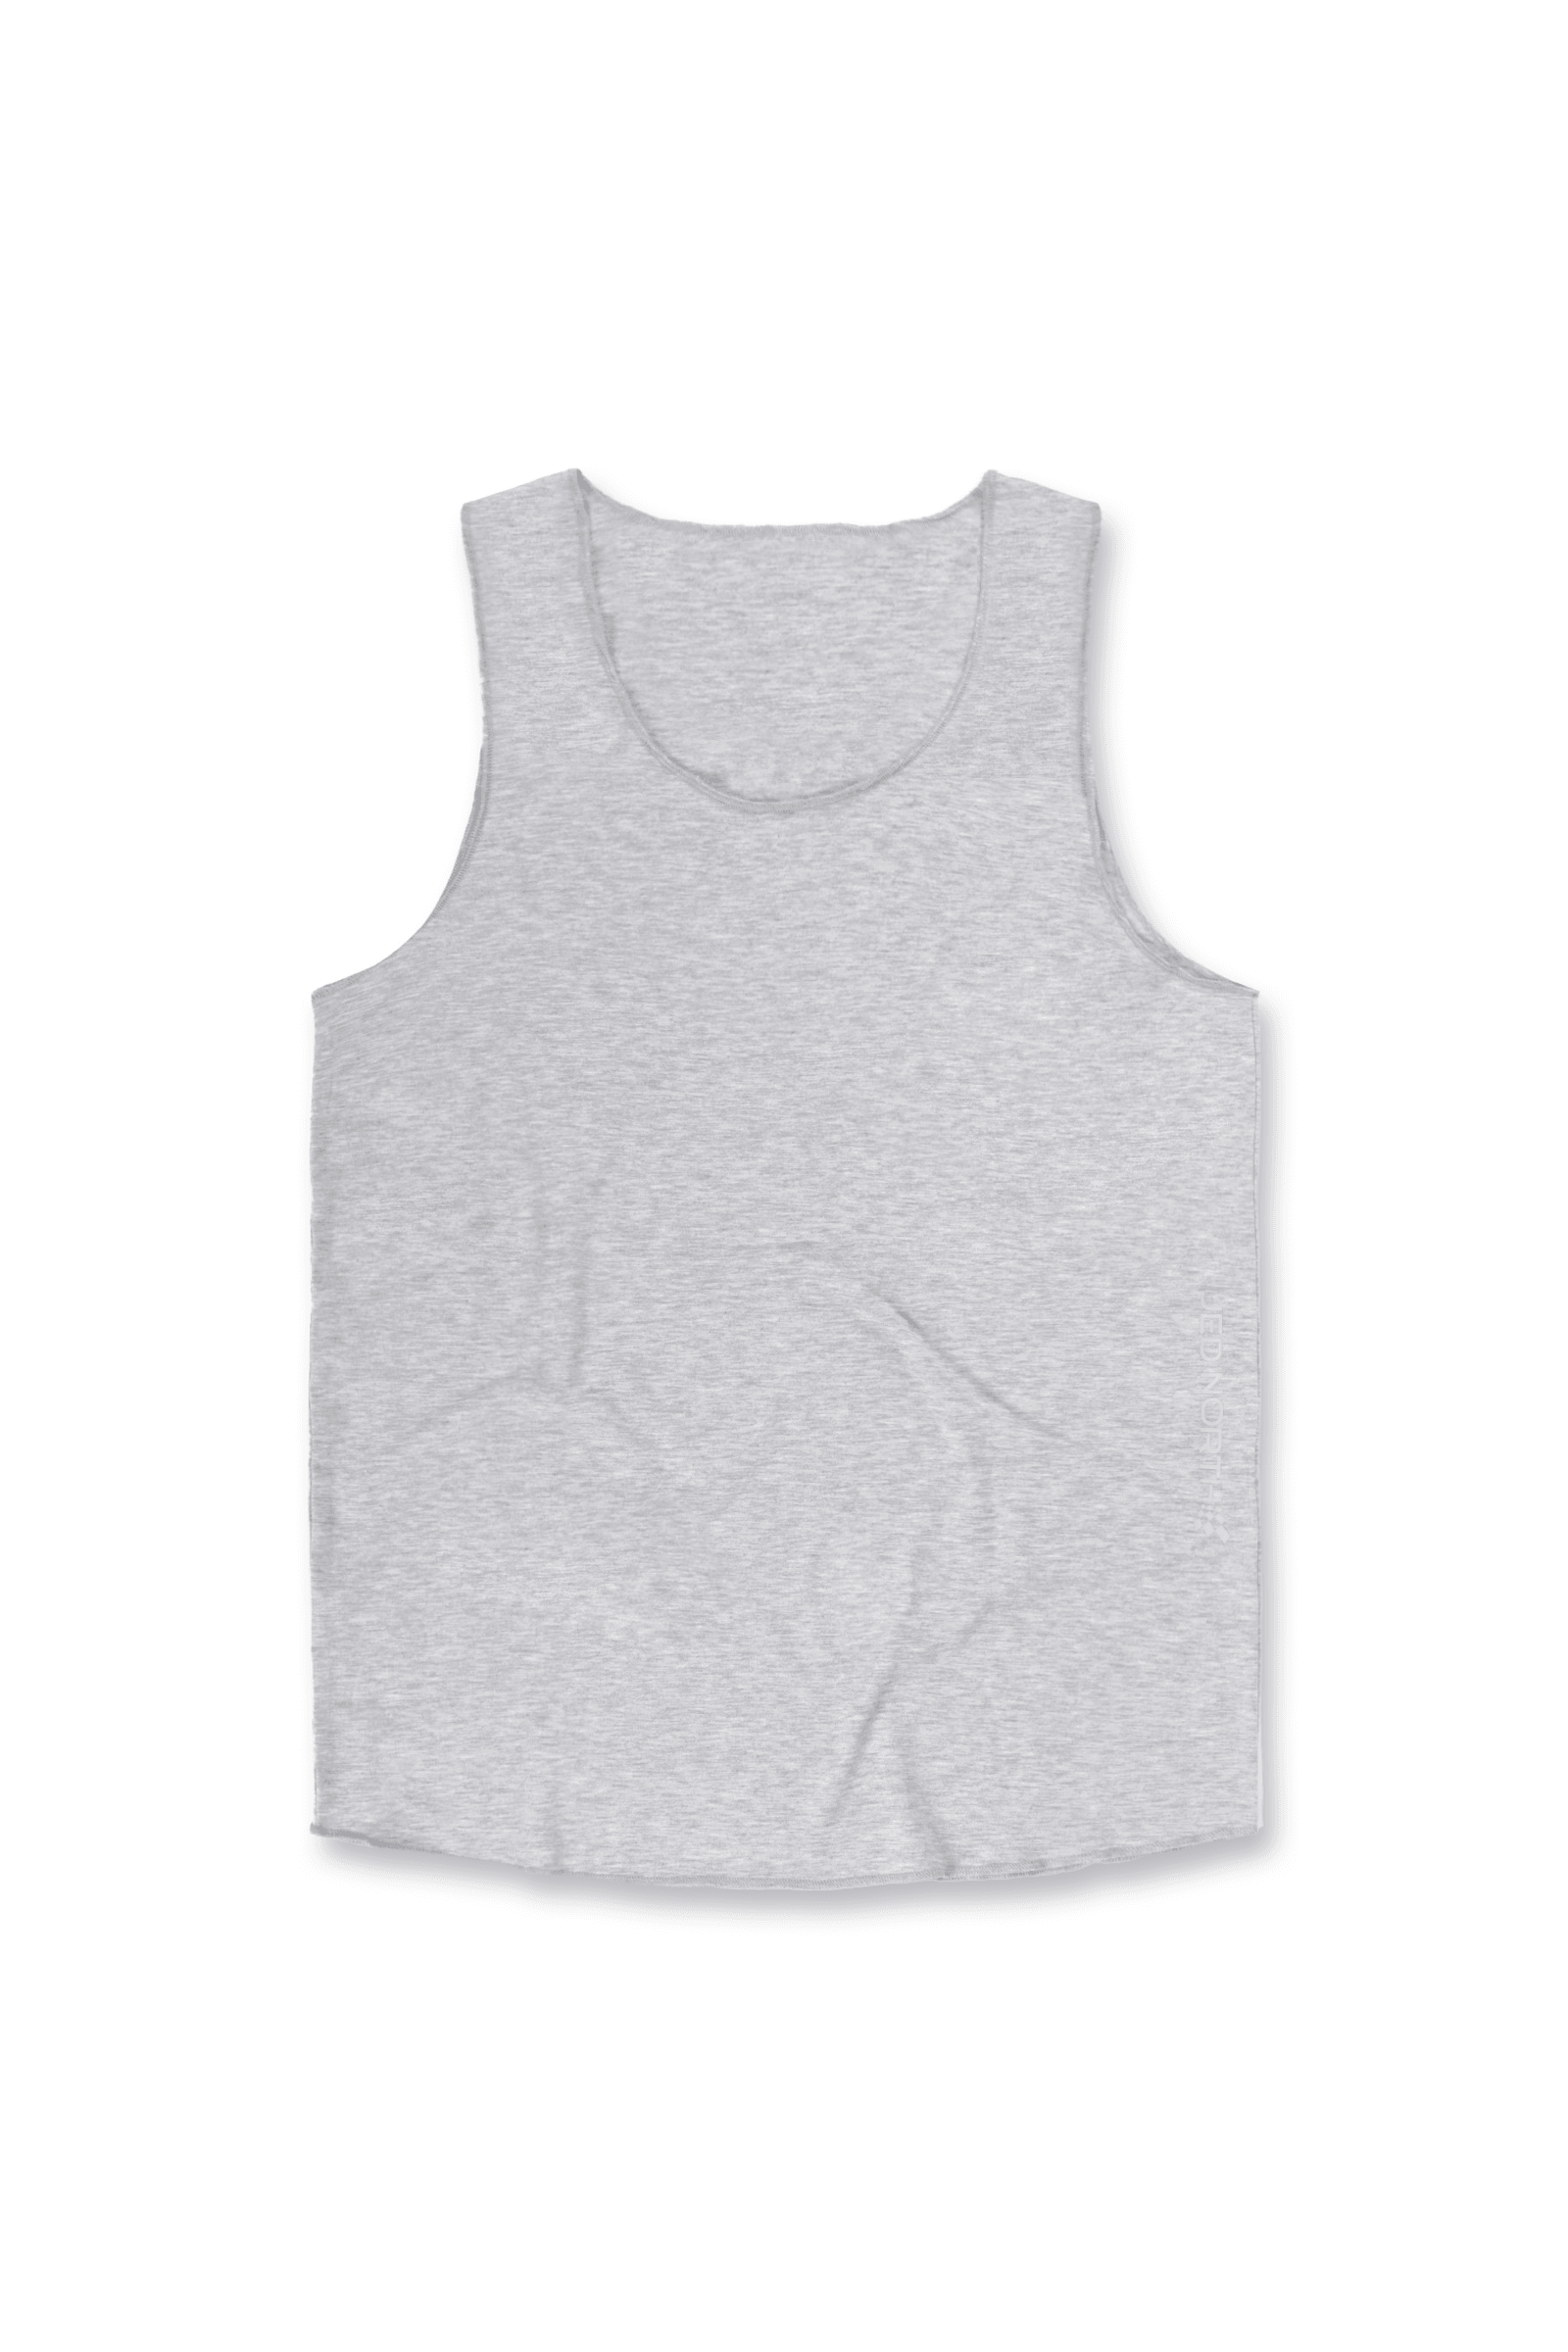 Training Raw-Edge Muscle Tank Top - Gray - Jed North